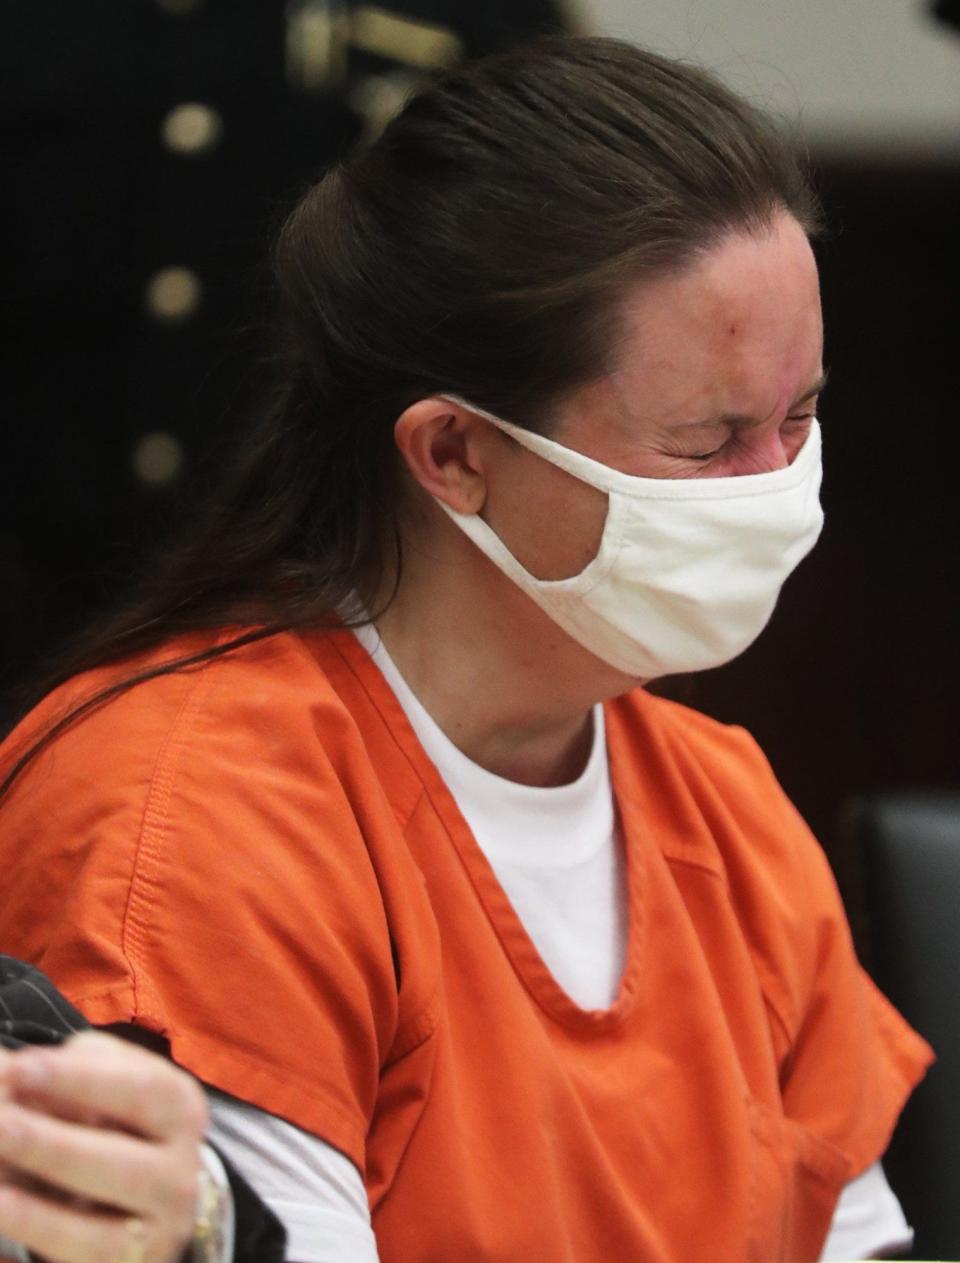 Erica Stefanko breaks down as she listens to family members speak during her sentencing in July 2021. Stefanko was sentenced to life in prison with possible parole after 30 years, but her conviction was later overturned. She will be retried starting Tuesday.